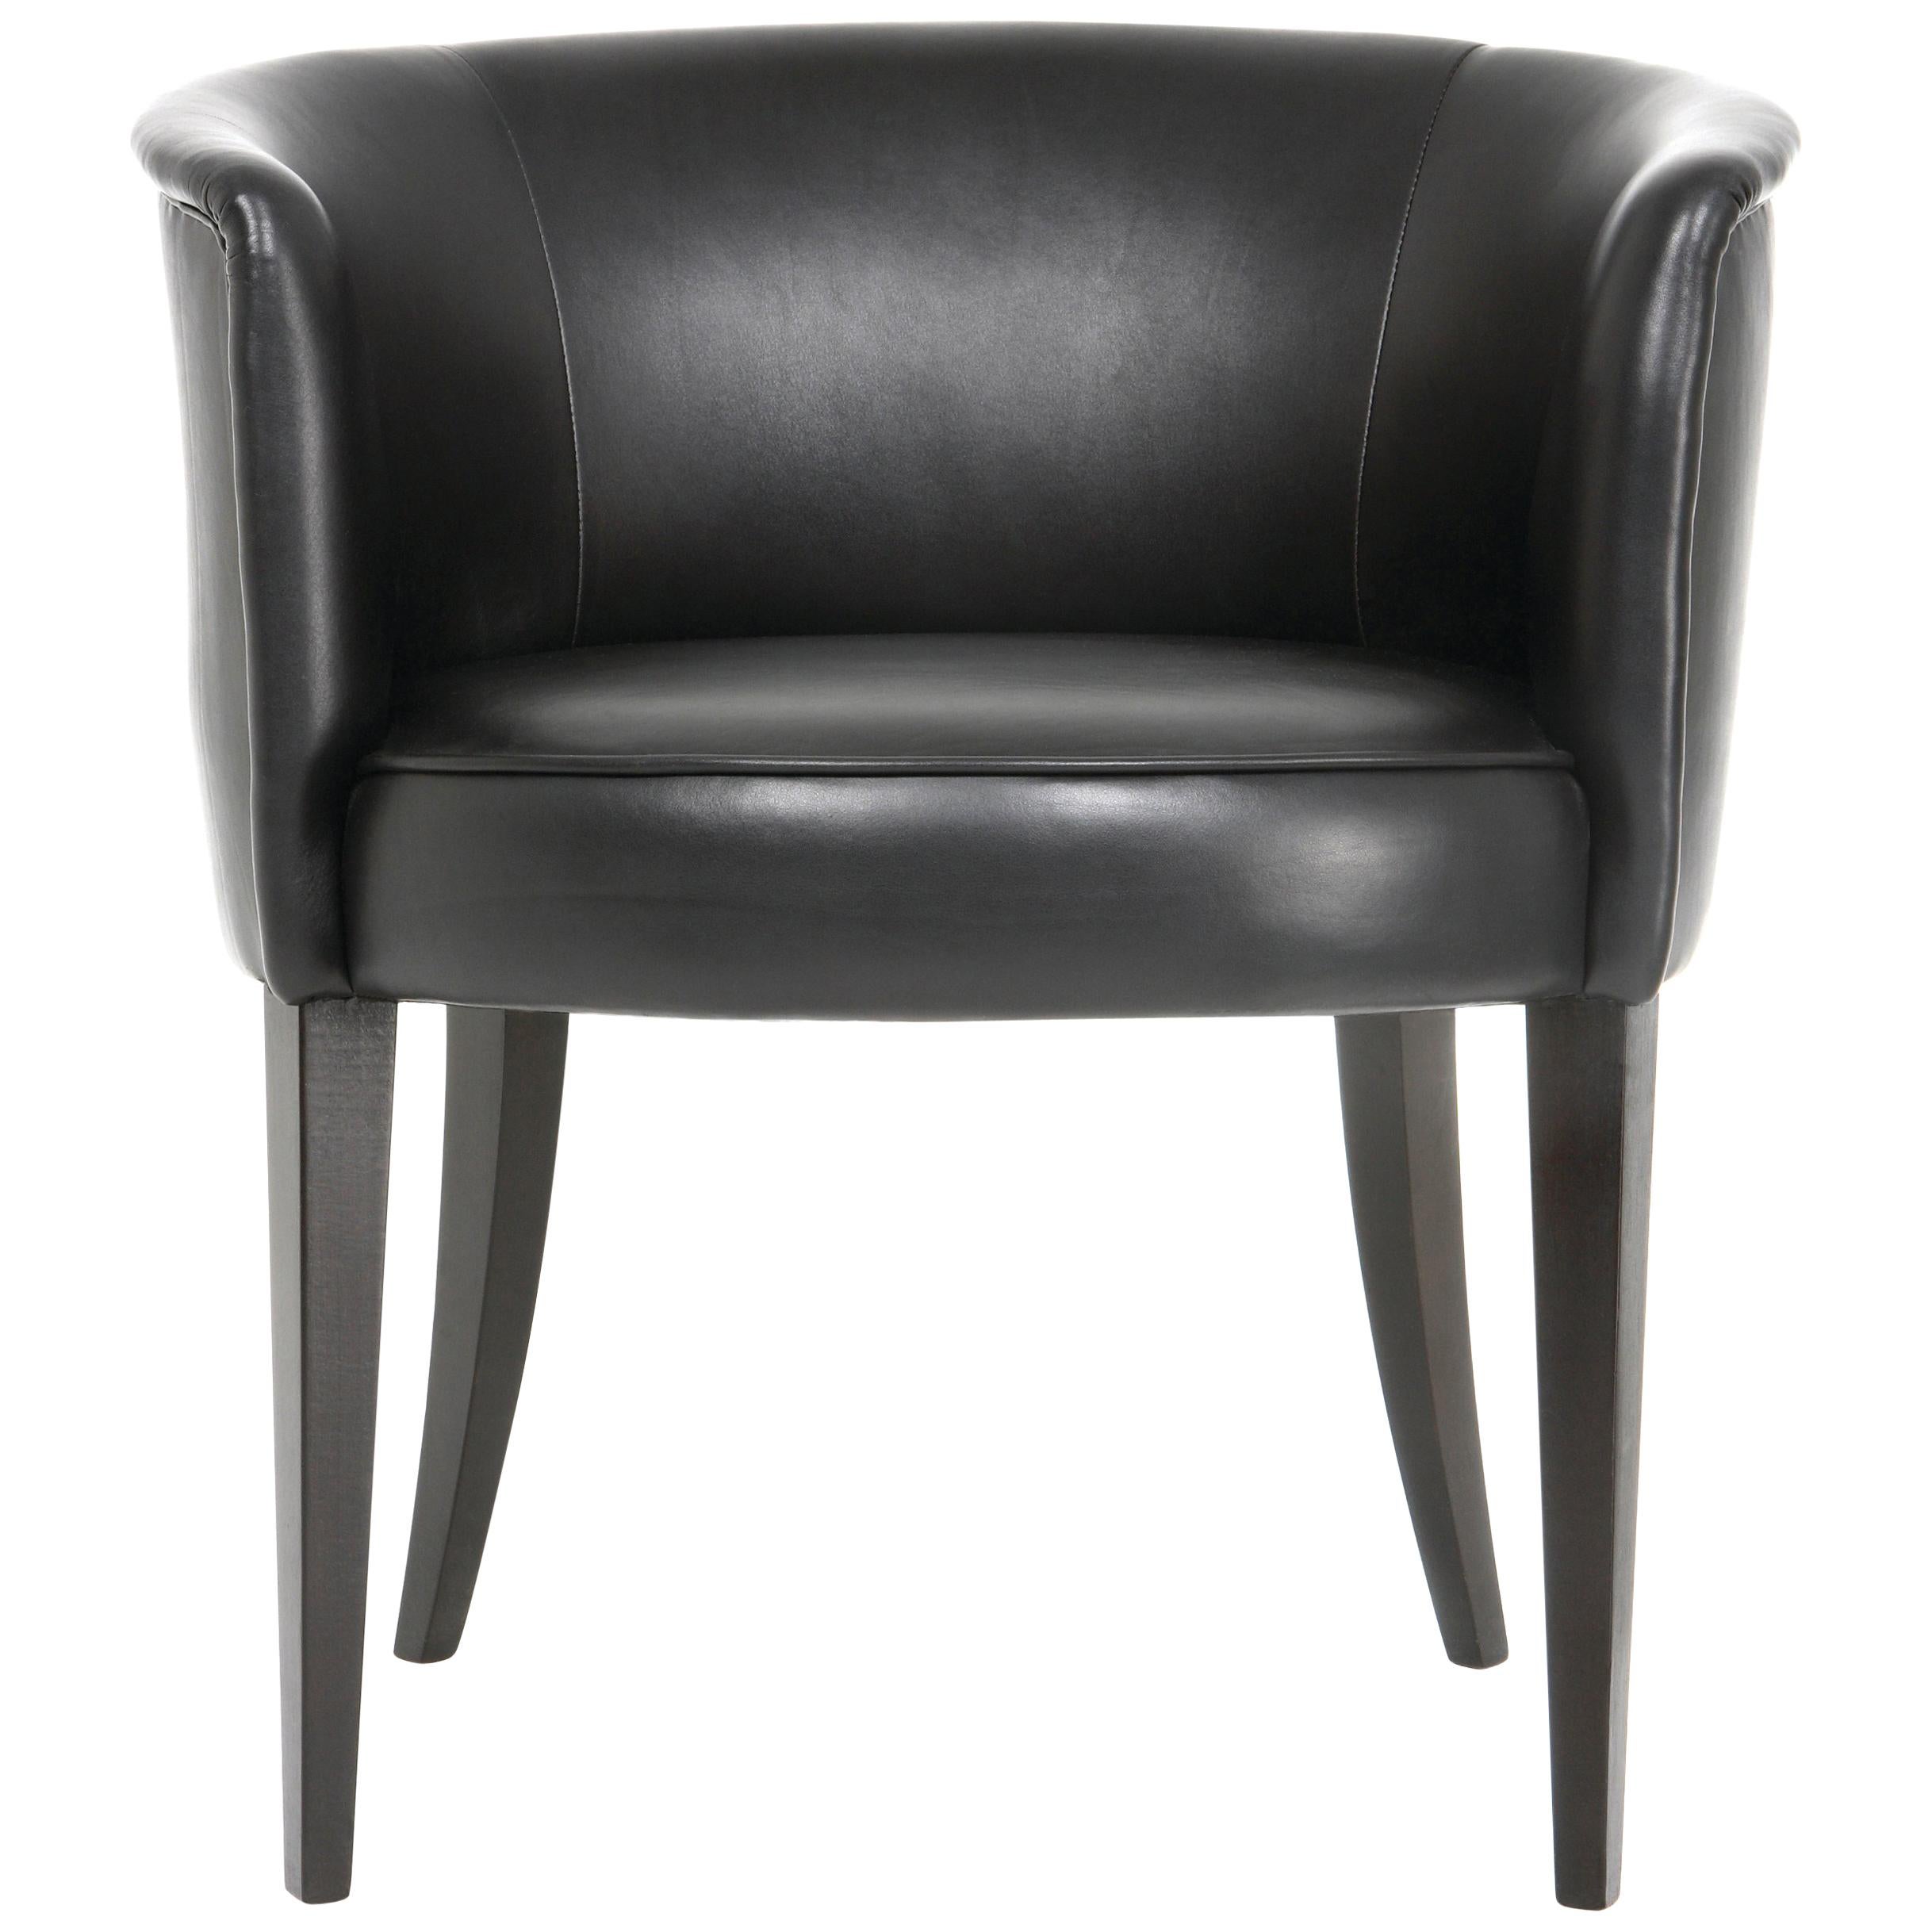 Round Upholstered Chair in Leather, Vica designed by Annabelle Selldorf